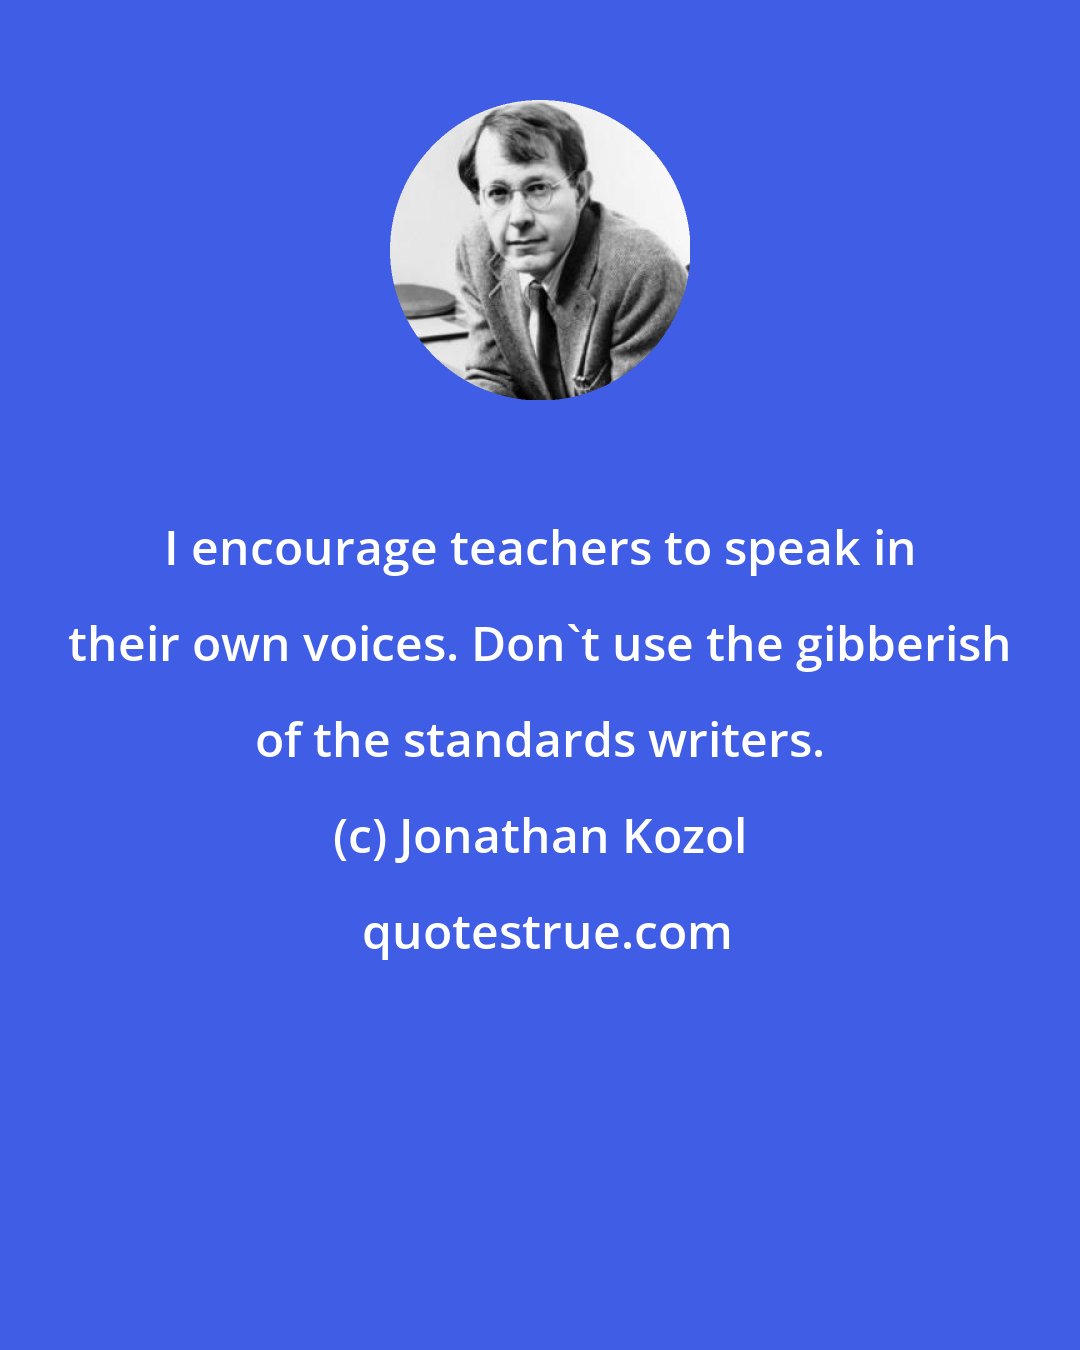 Jonathan Kozol: I encourage teachers to speak in their own voices. Don't use the gibberish of the standards writers.